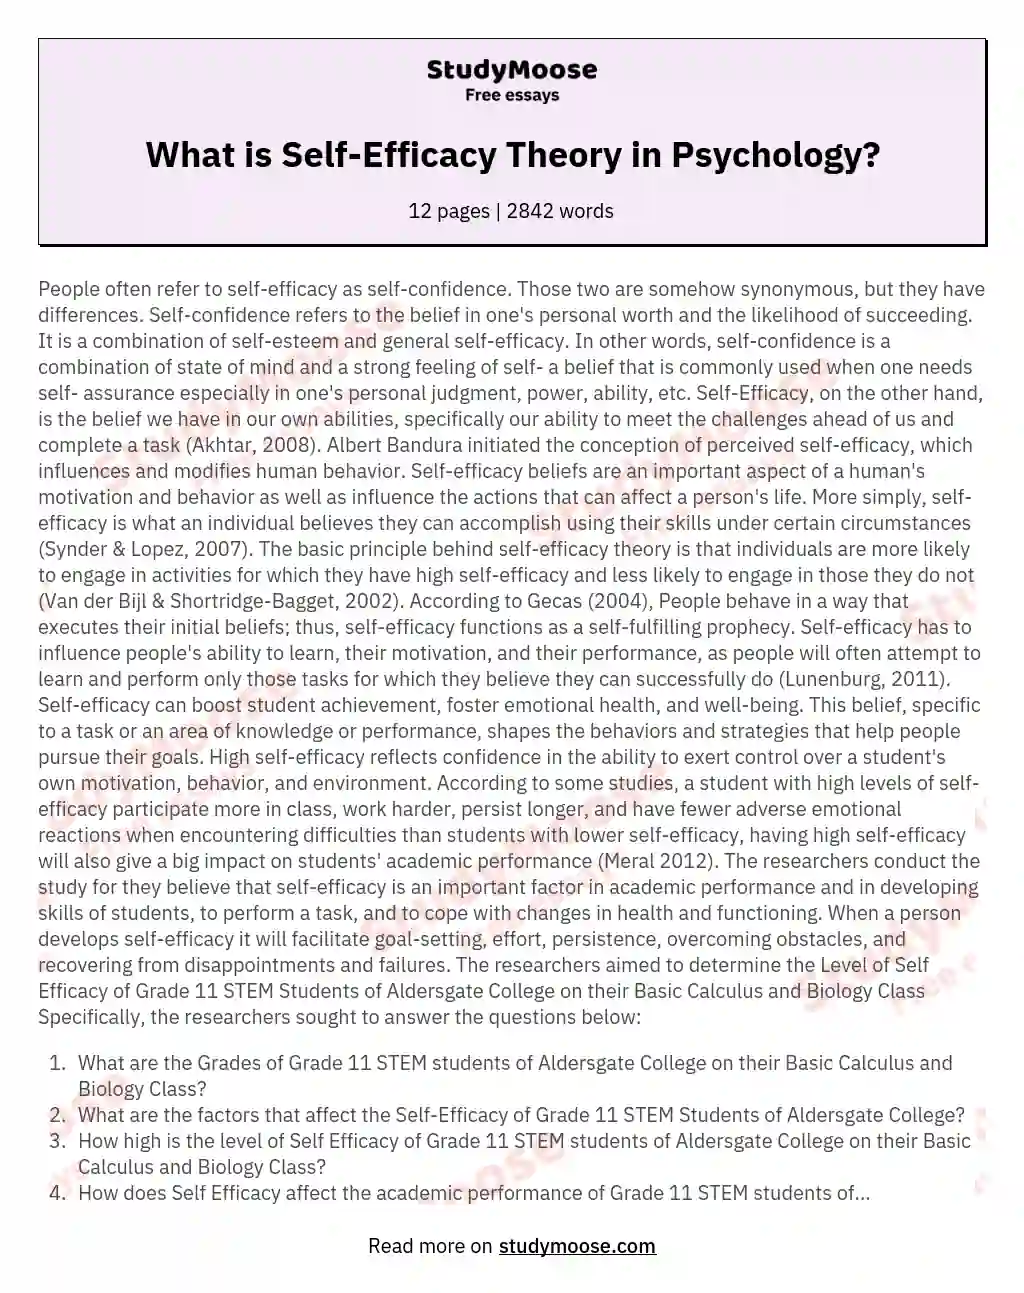 What is Self-Efficacy Theory in Psychology?